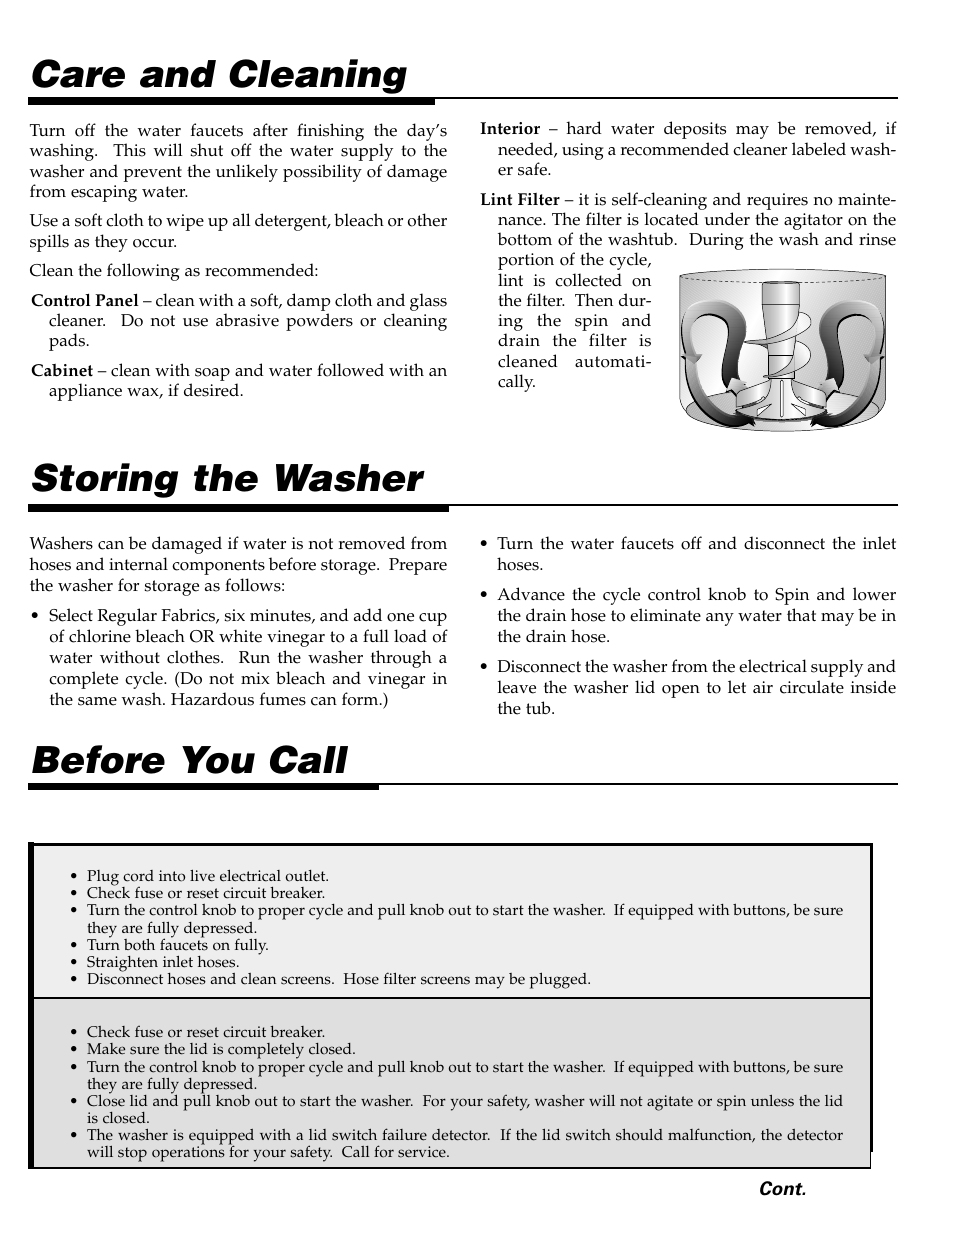 Care and cleaning, Storing the washer, Before you call | Maytag LAT2500AAE User Manual | Page 7 / 28